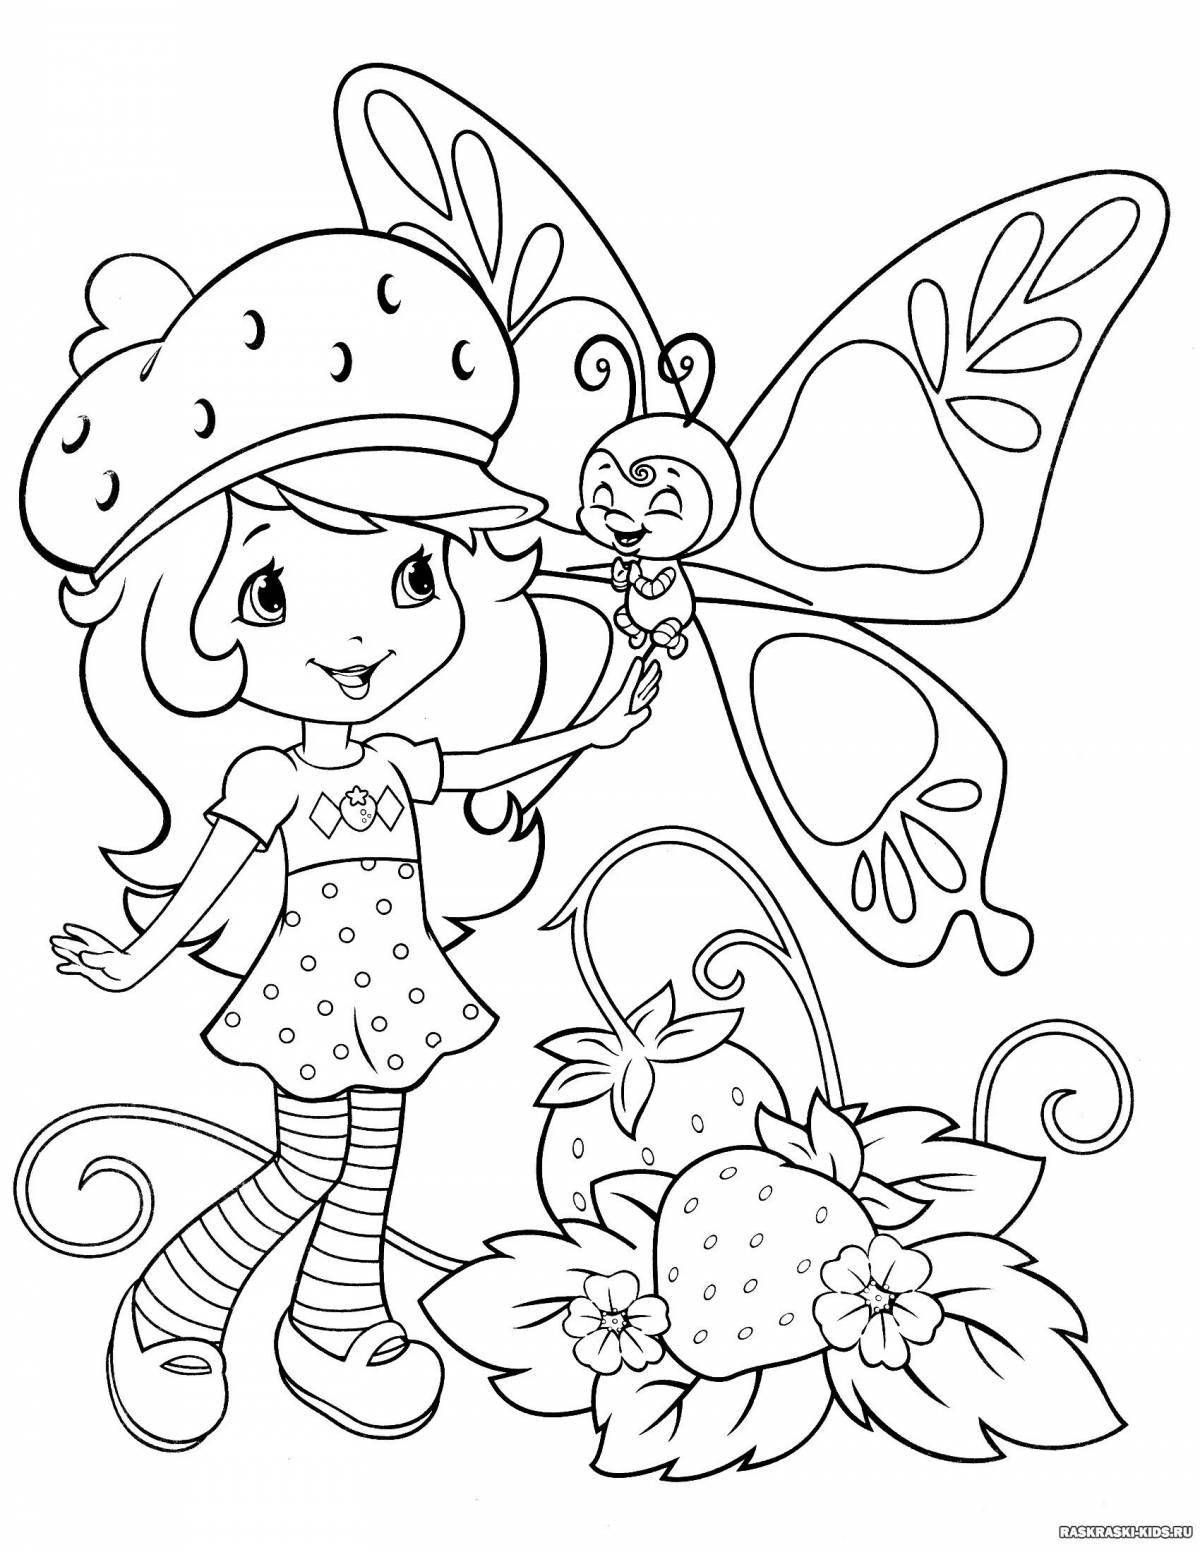 Great coloring book for girls 5-7 years old